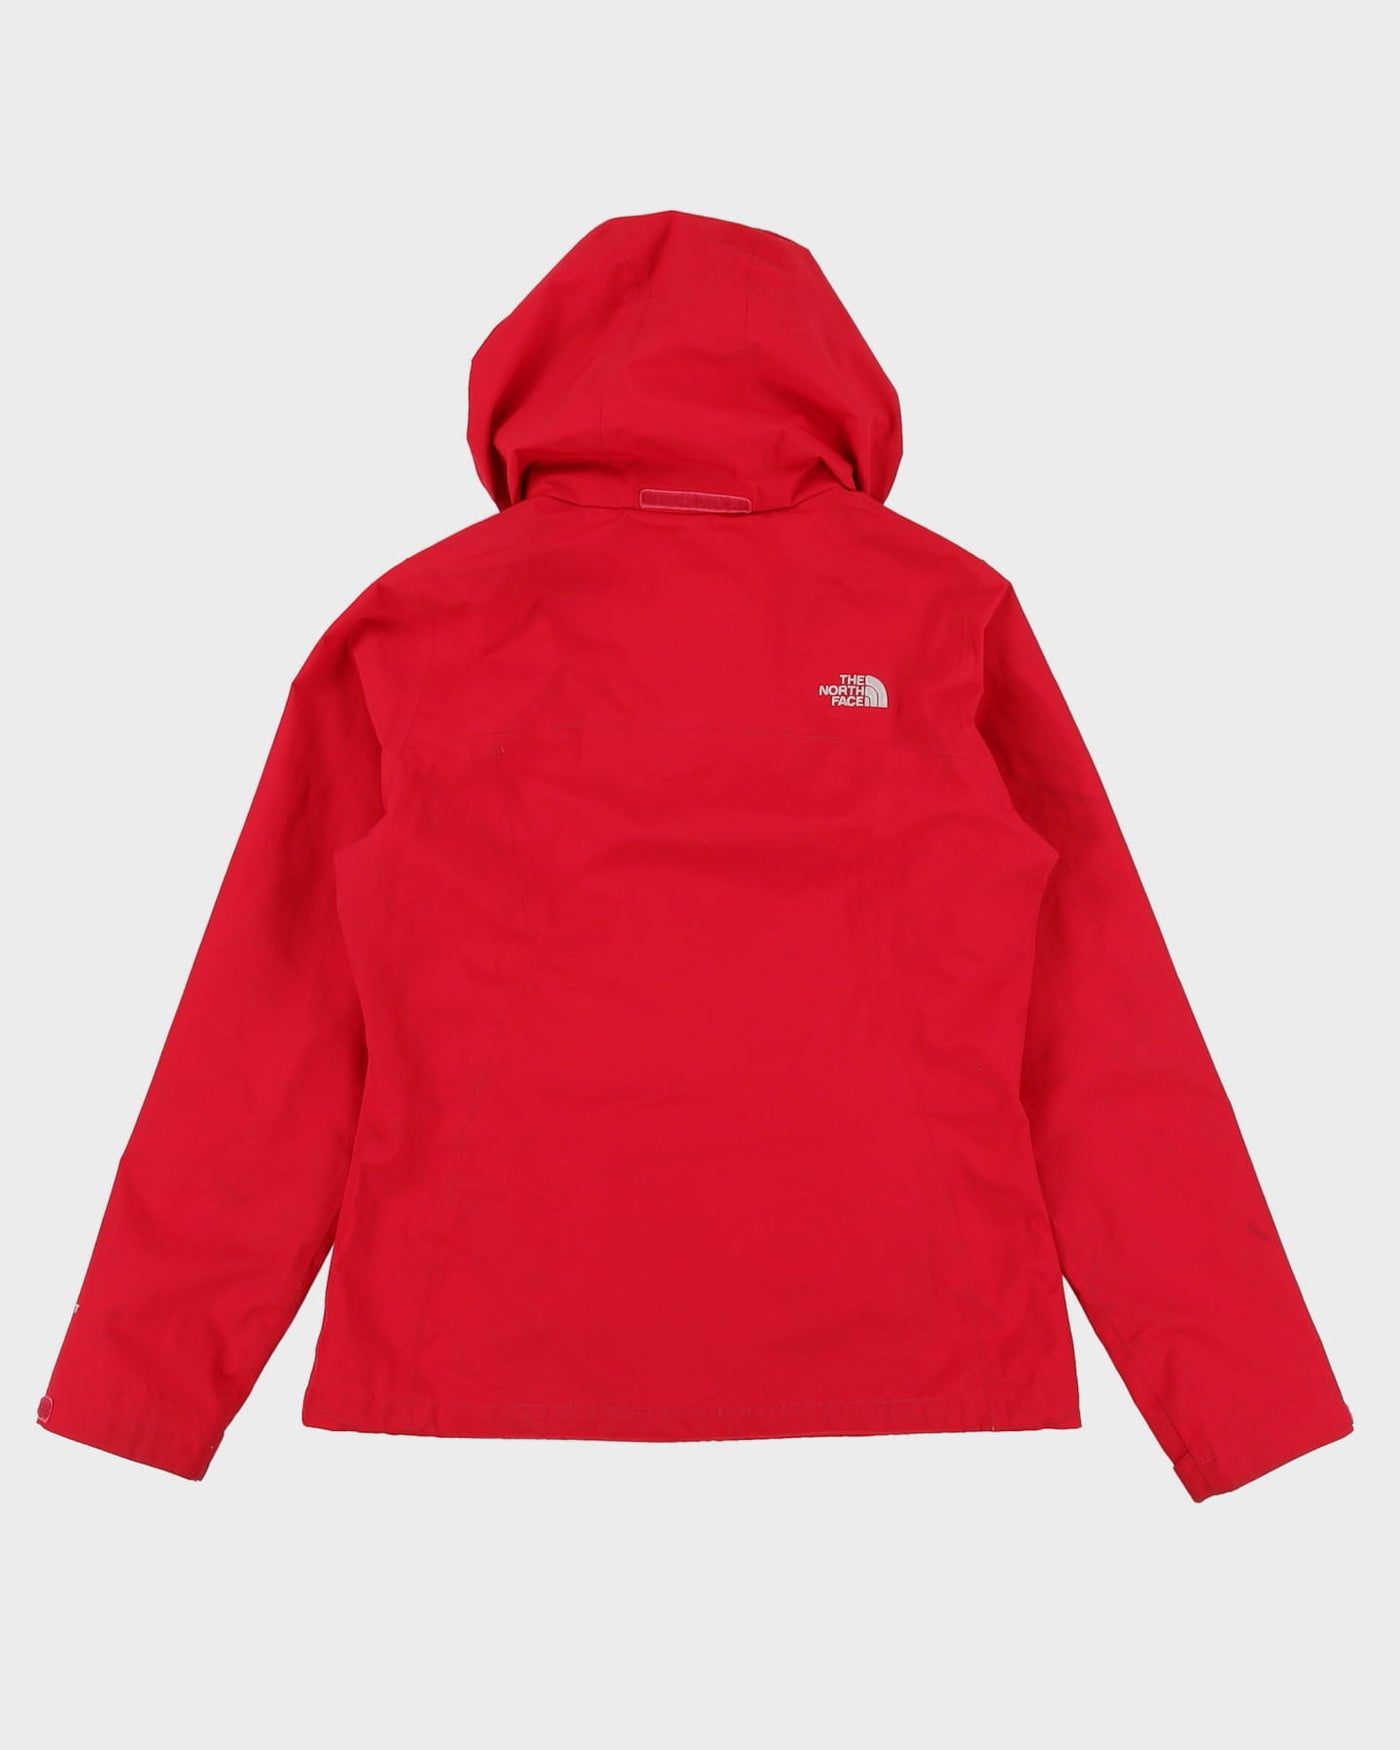 The North Face Pink Anorak Rain Jacket - M